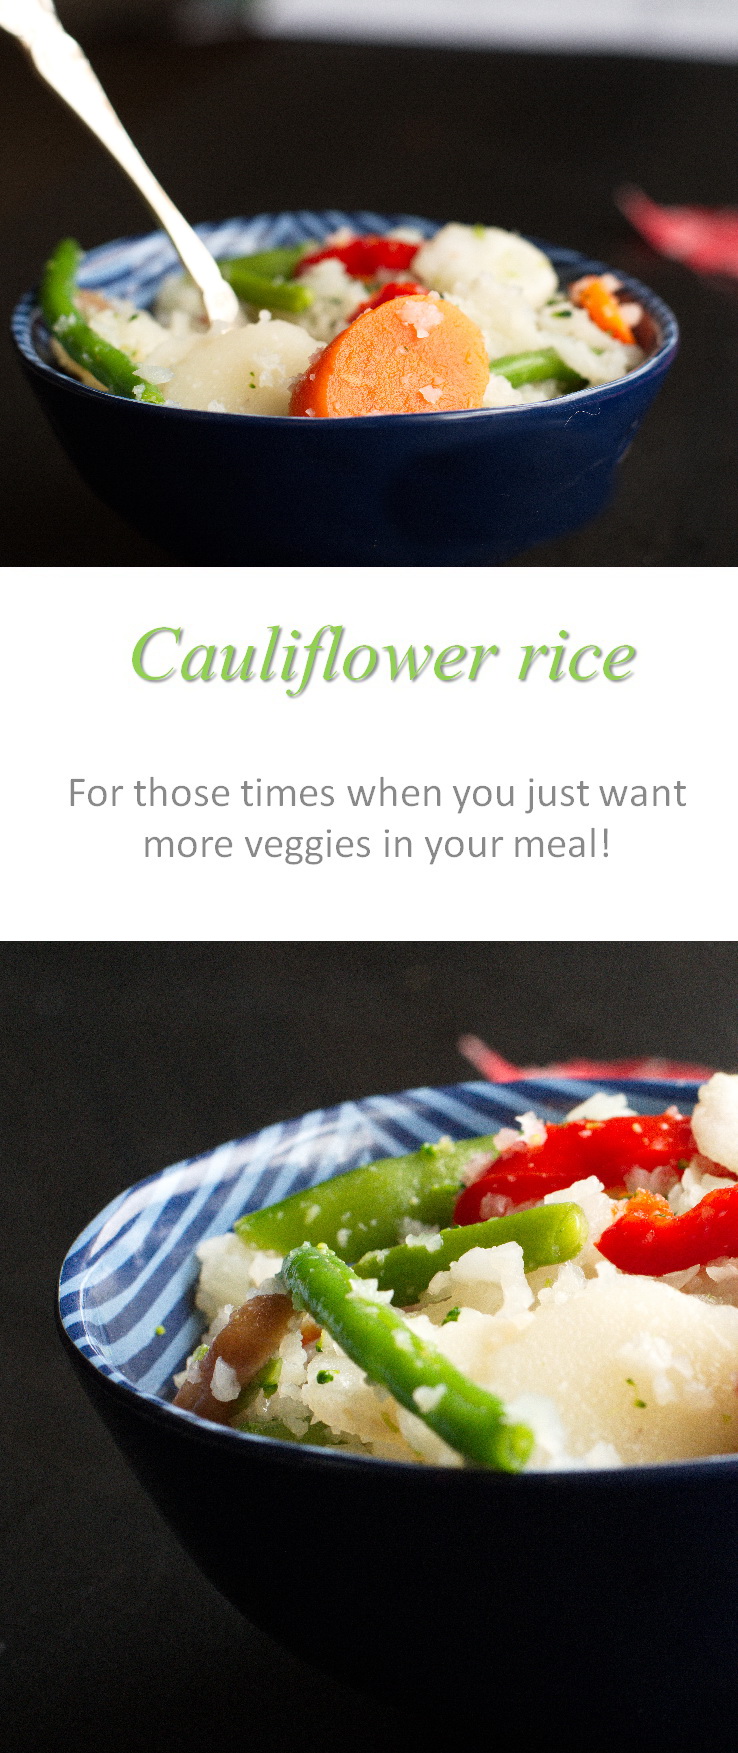 When you just want more veggies in your meal, this cauliflower rice is so easy to make and so versatile, you won't even miss the real rice! #cauliflower